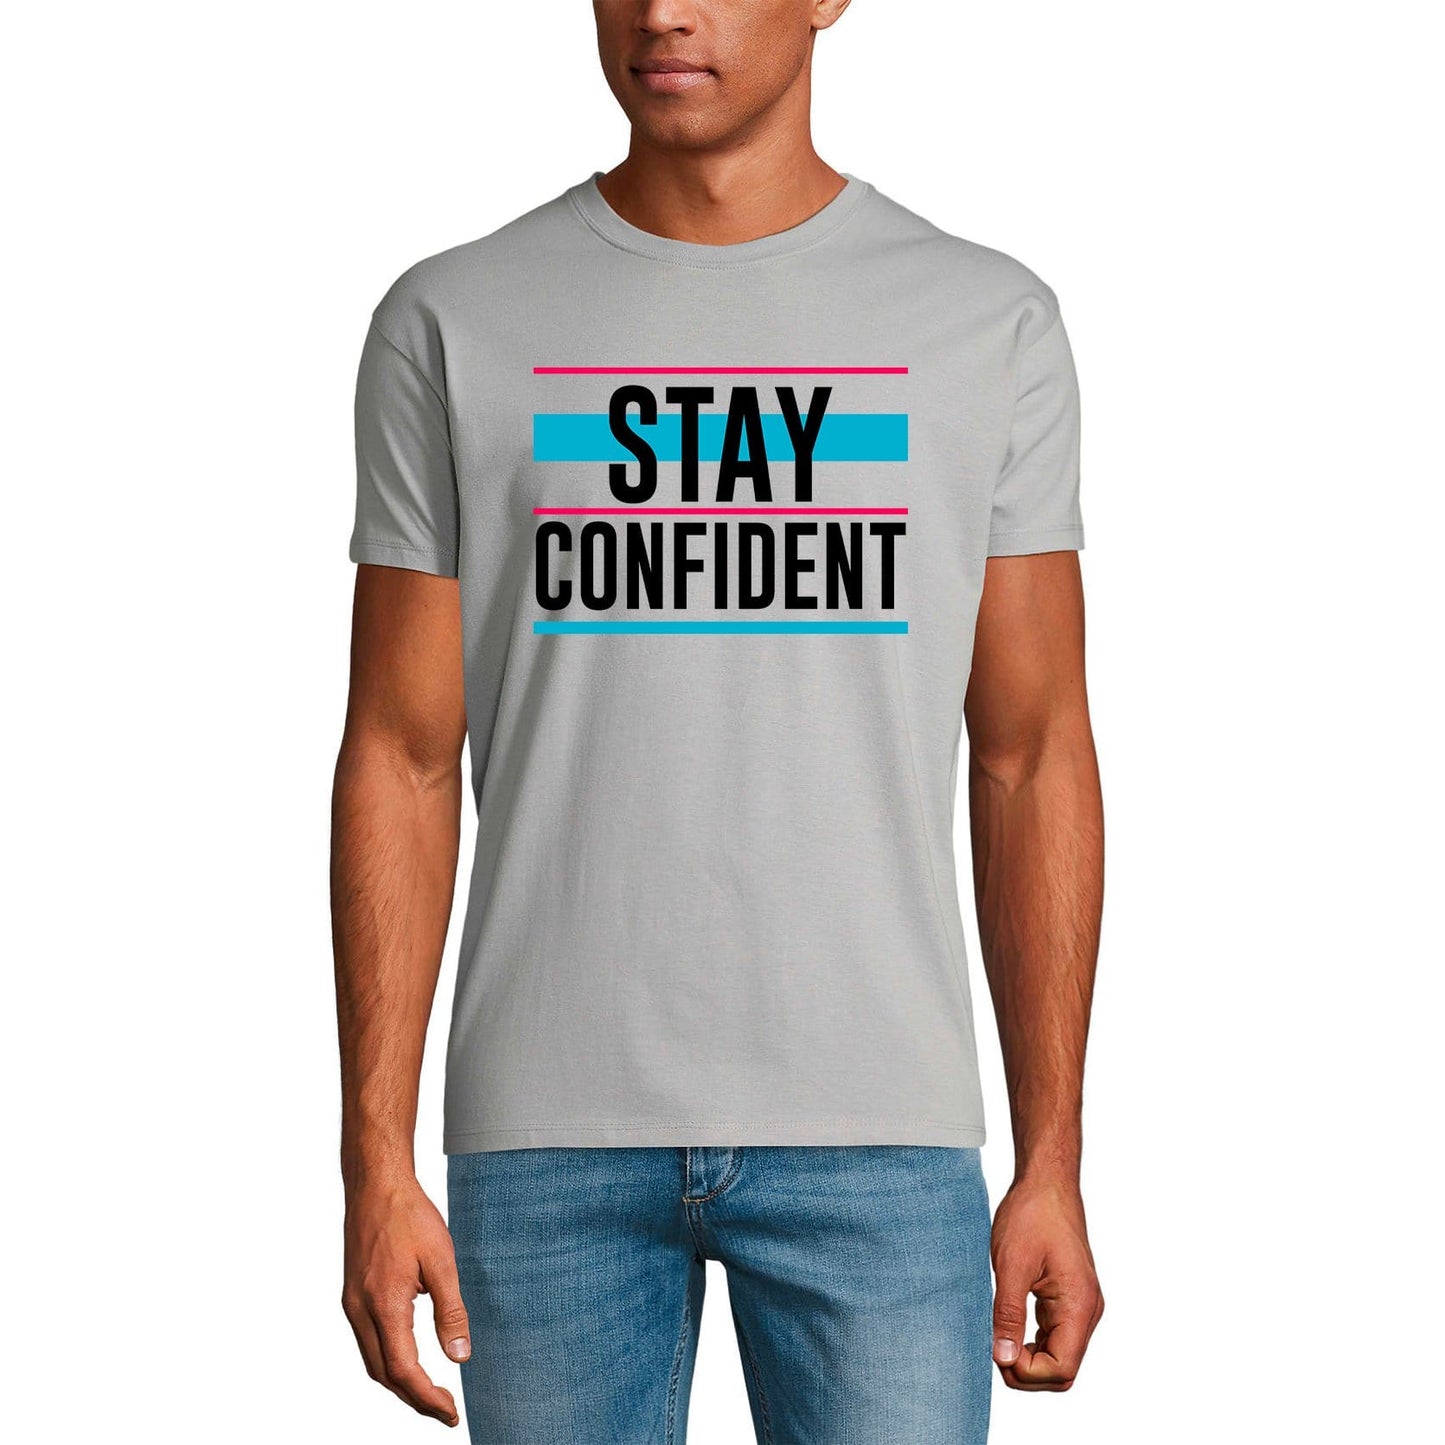 ULTRABASIC Graphic Men's T-Shirt Stay Confident - Motivational Quote